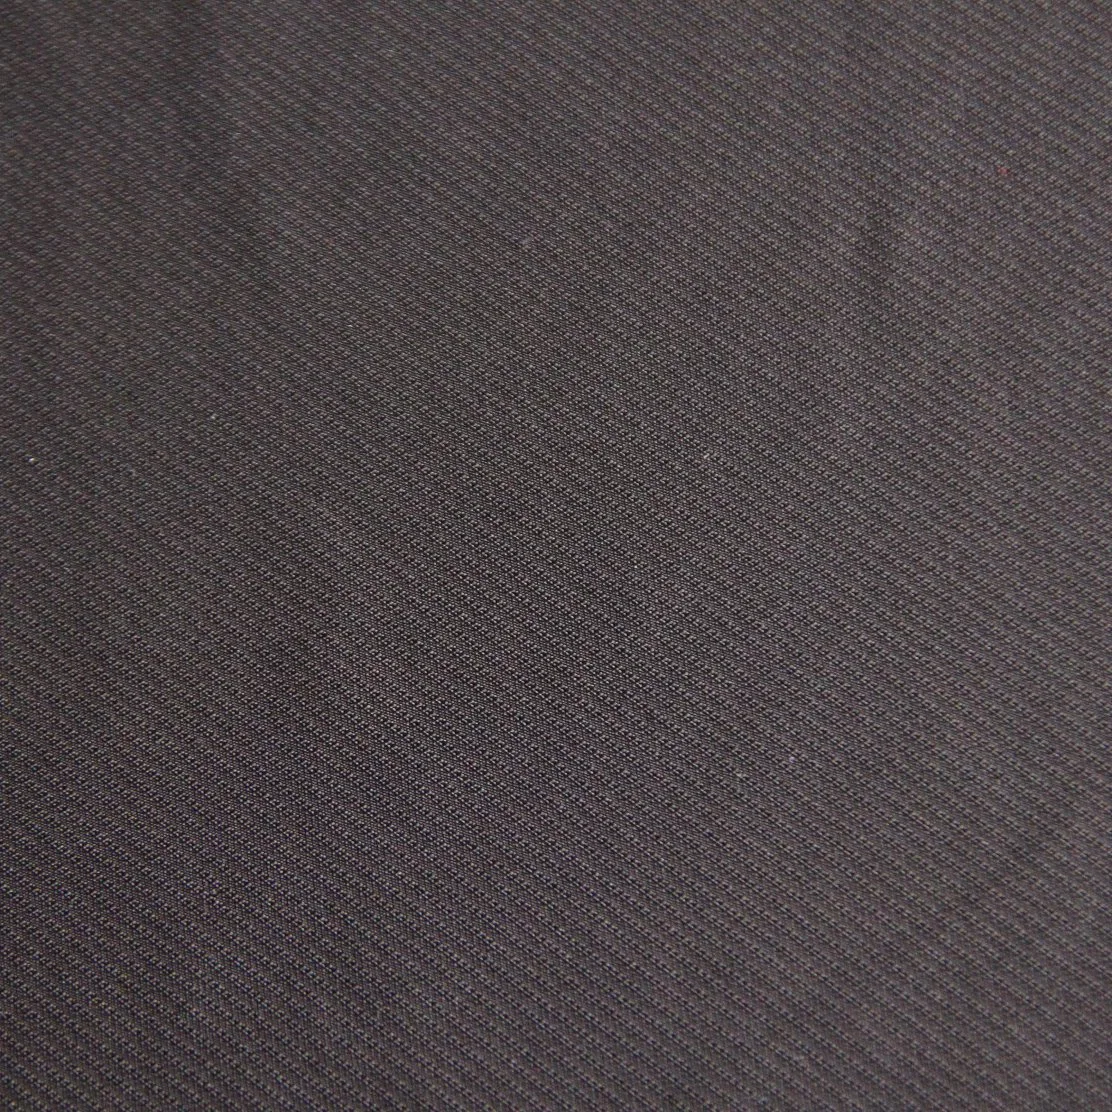 75D+40d Polyester Spandex/Lycra Knitting Swimwear Fabric with Special Texture for Garments/Sportswear